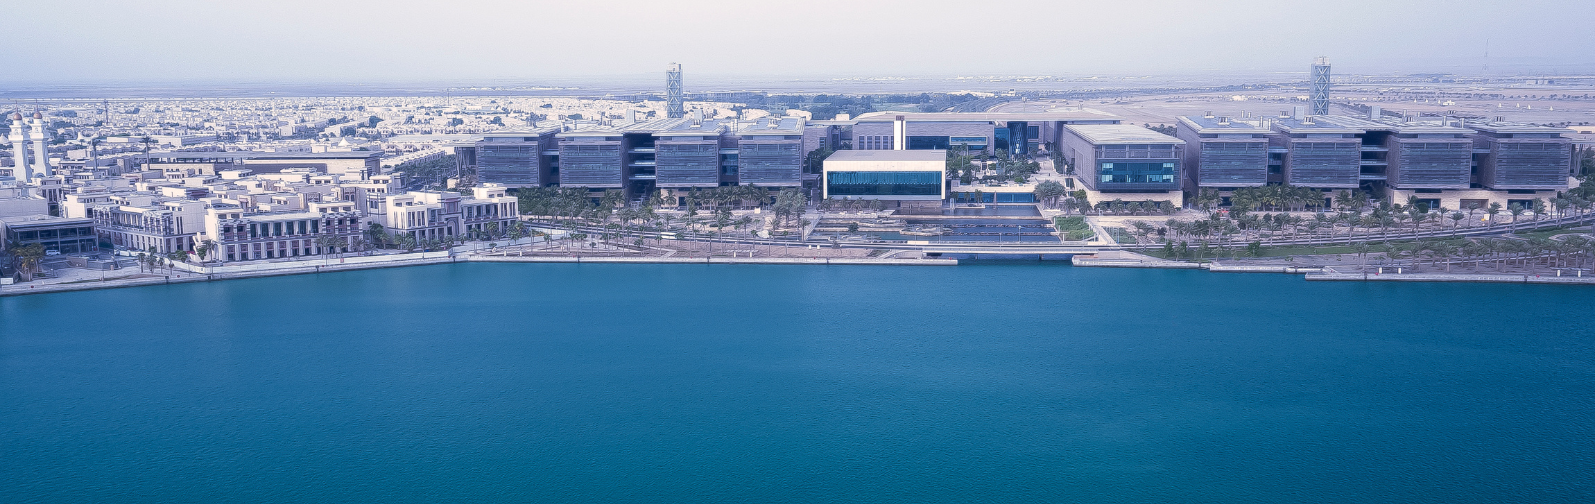 King Abdullah University of Science and Technology (KAUST) 